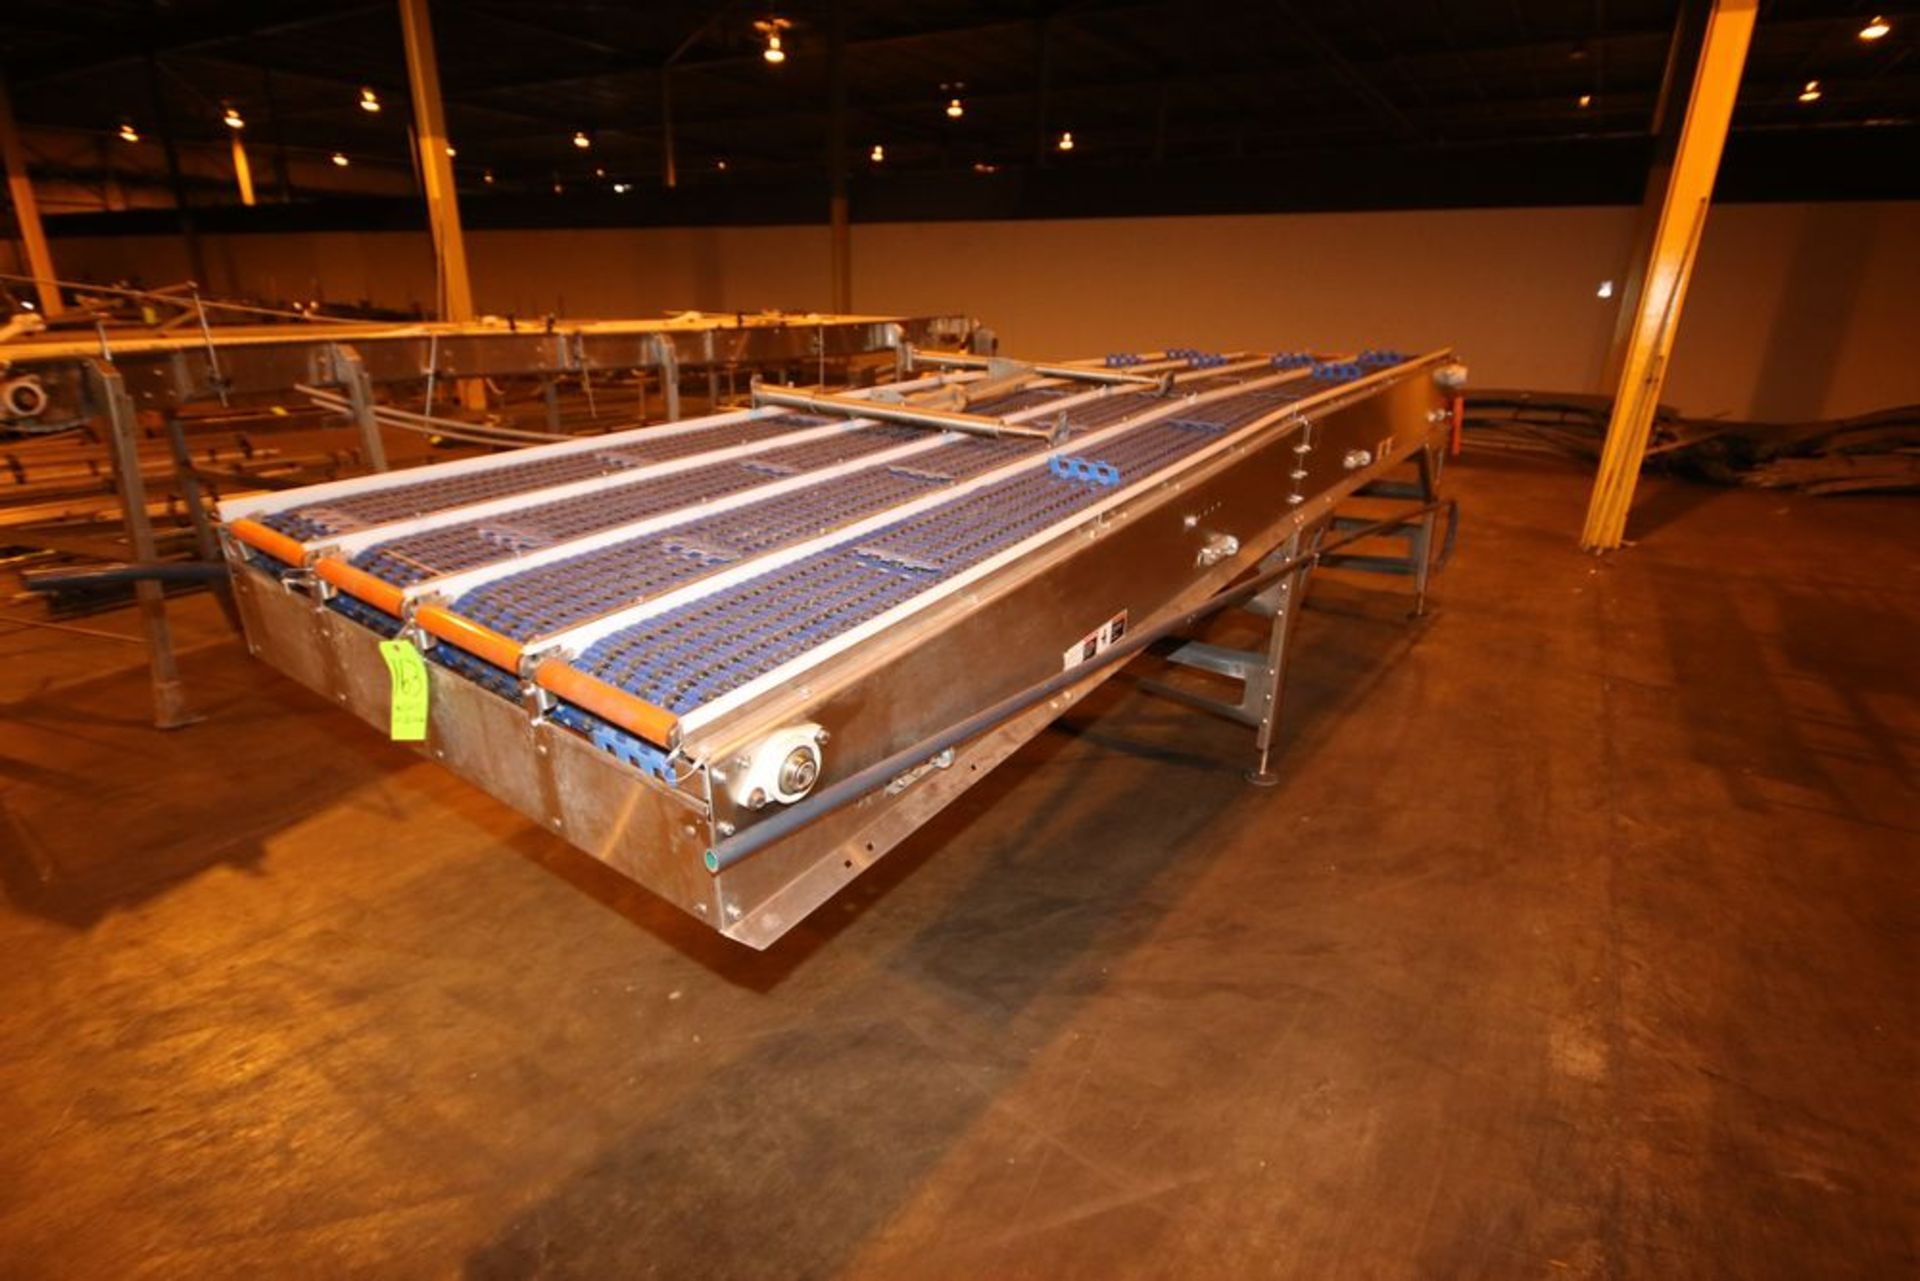 2012 Intralox 4-Lane S/S Conveyor, with SEW Drive, Lane Width: 12" W, Overall Dims.: Aprox. 14' L - Image 2 of 6